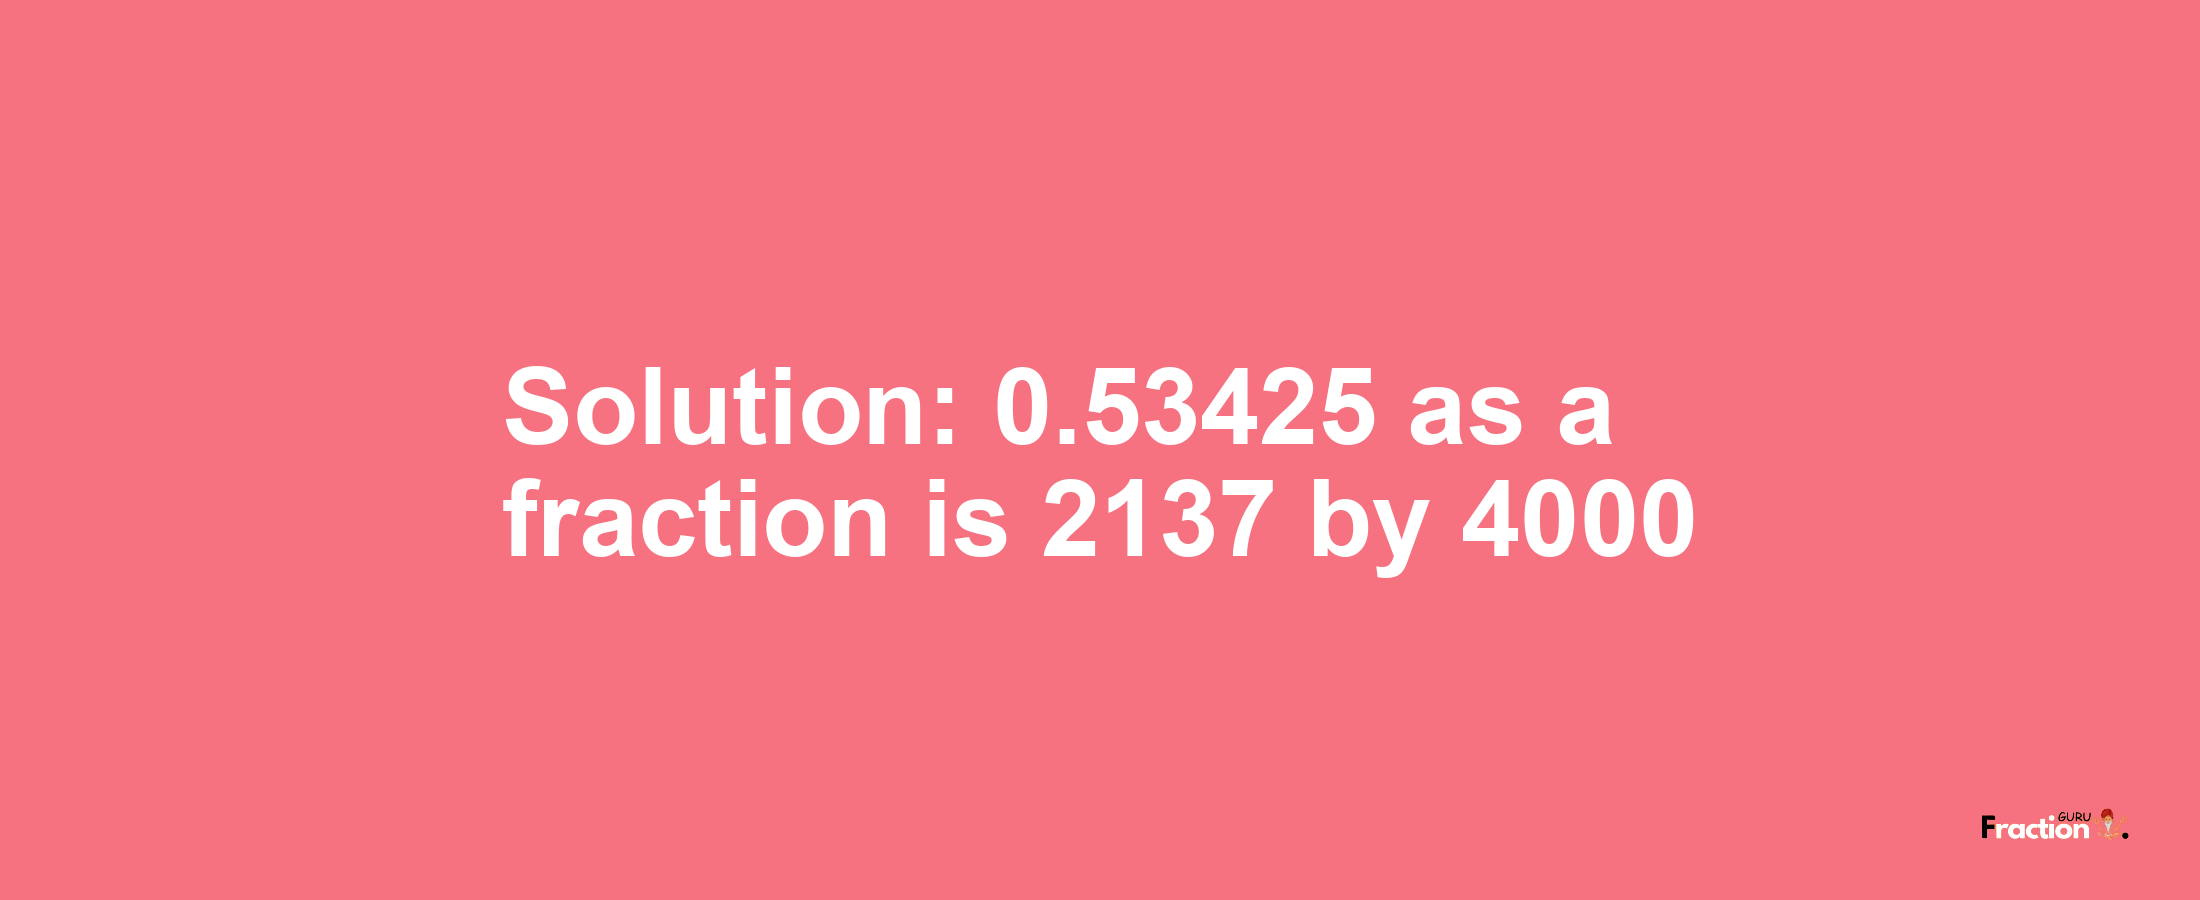 Solution:0.53425 as a fraction is 2137/4000